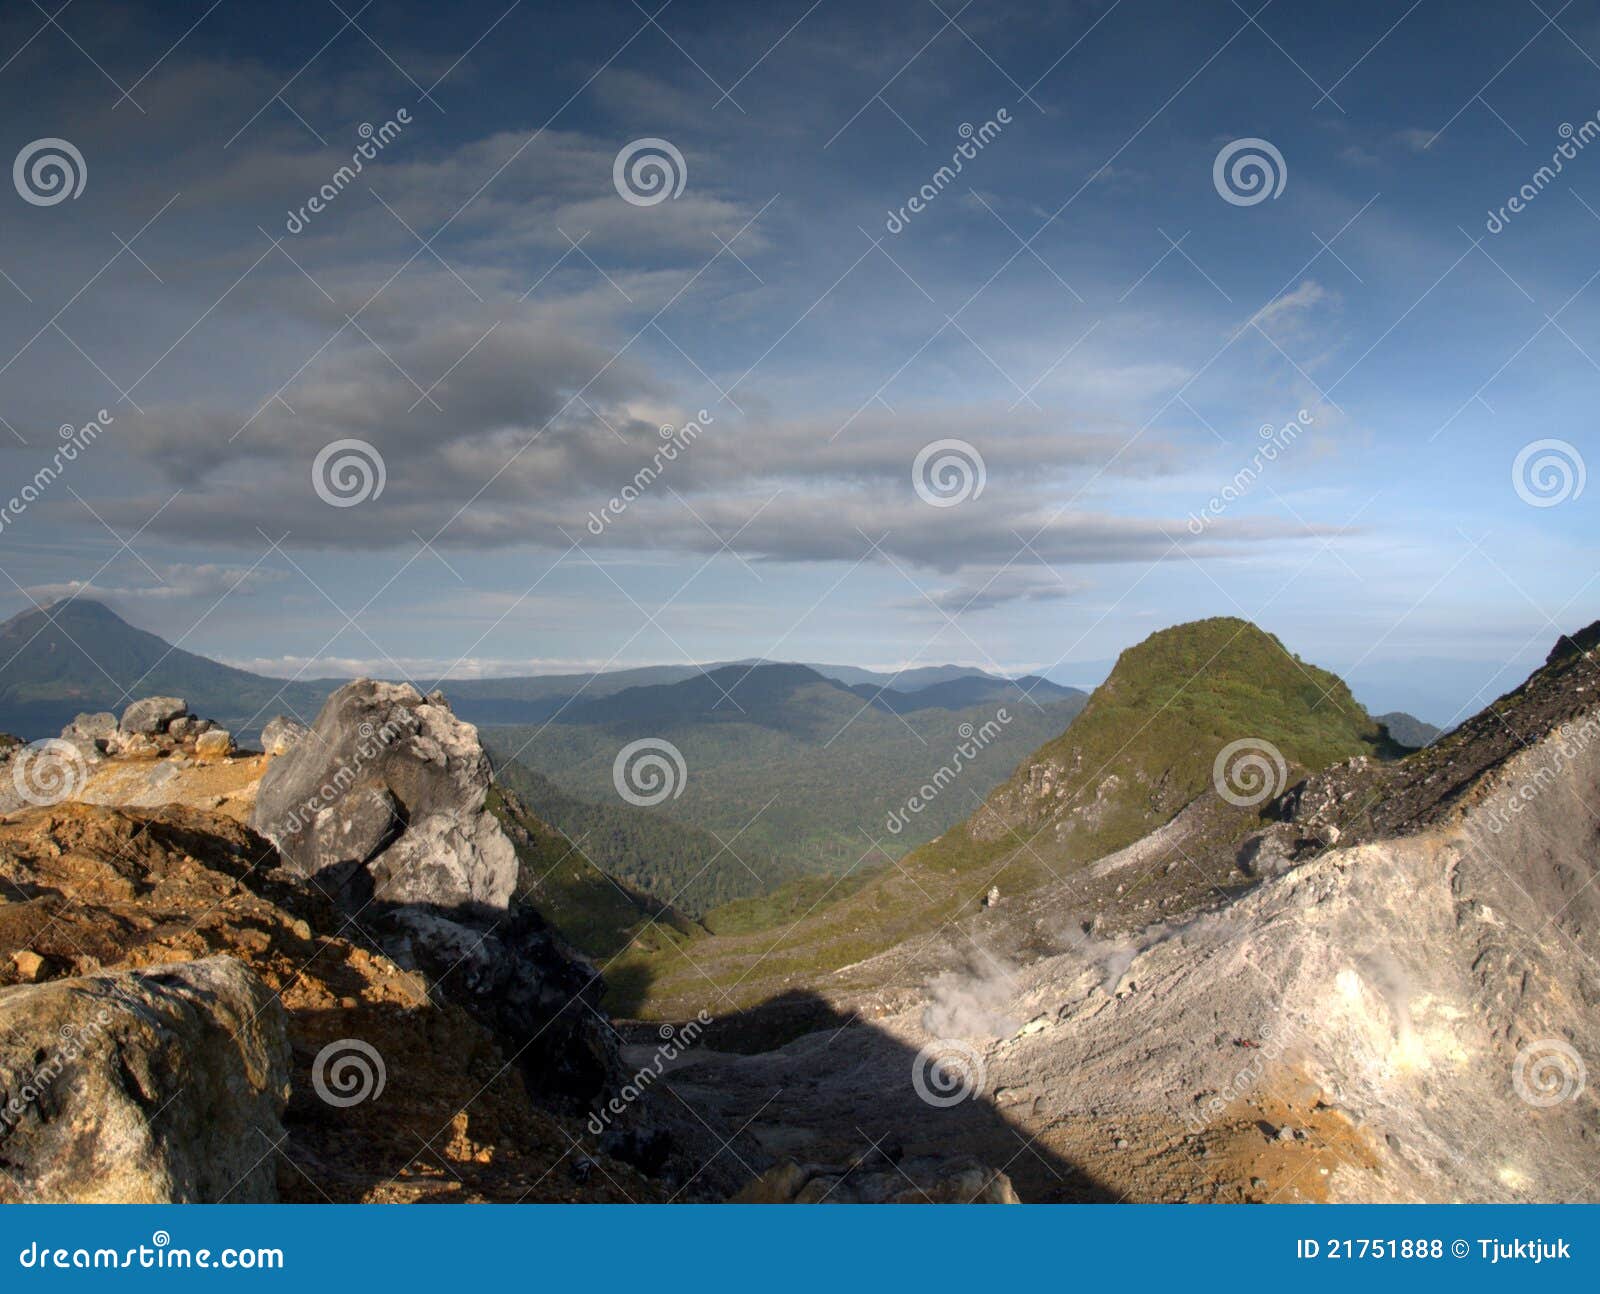 Download this Mount Sibayak The Morning Top Mountain picture